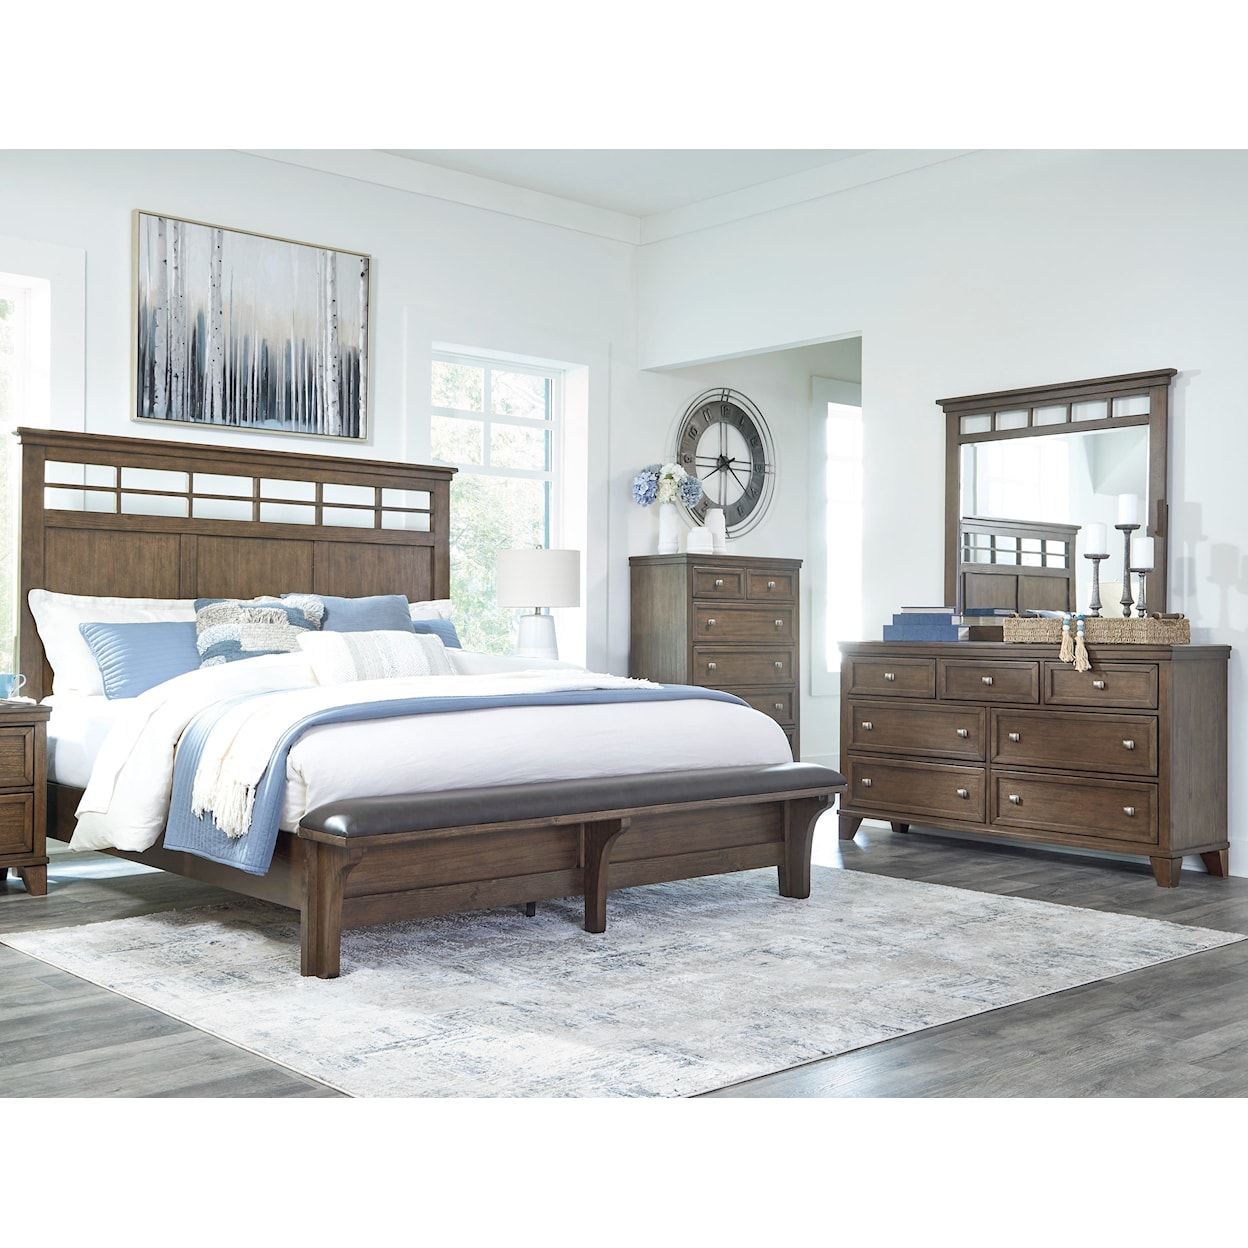 Benchcraft by Ashley Shawbeck Queen Bedroom Group